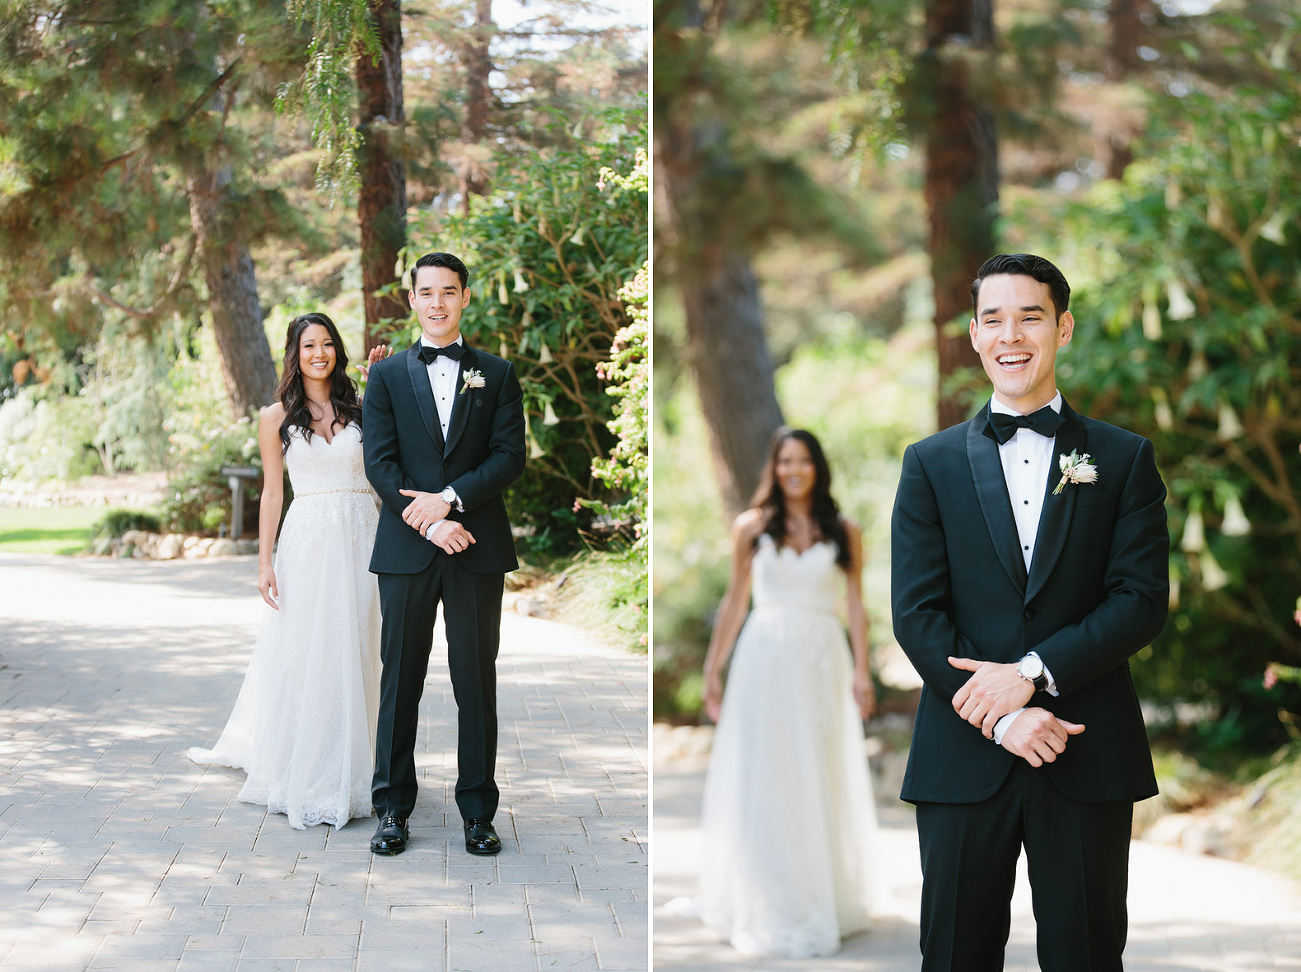 First look between dana and ryan on their wedding day on a garden pathway